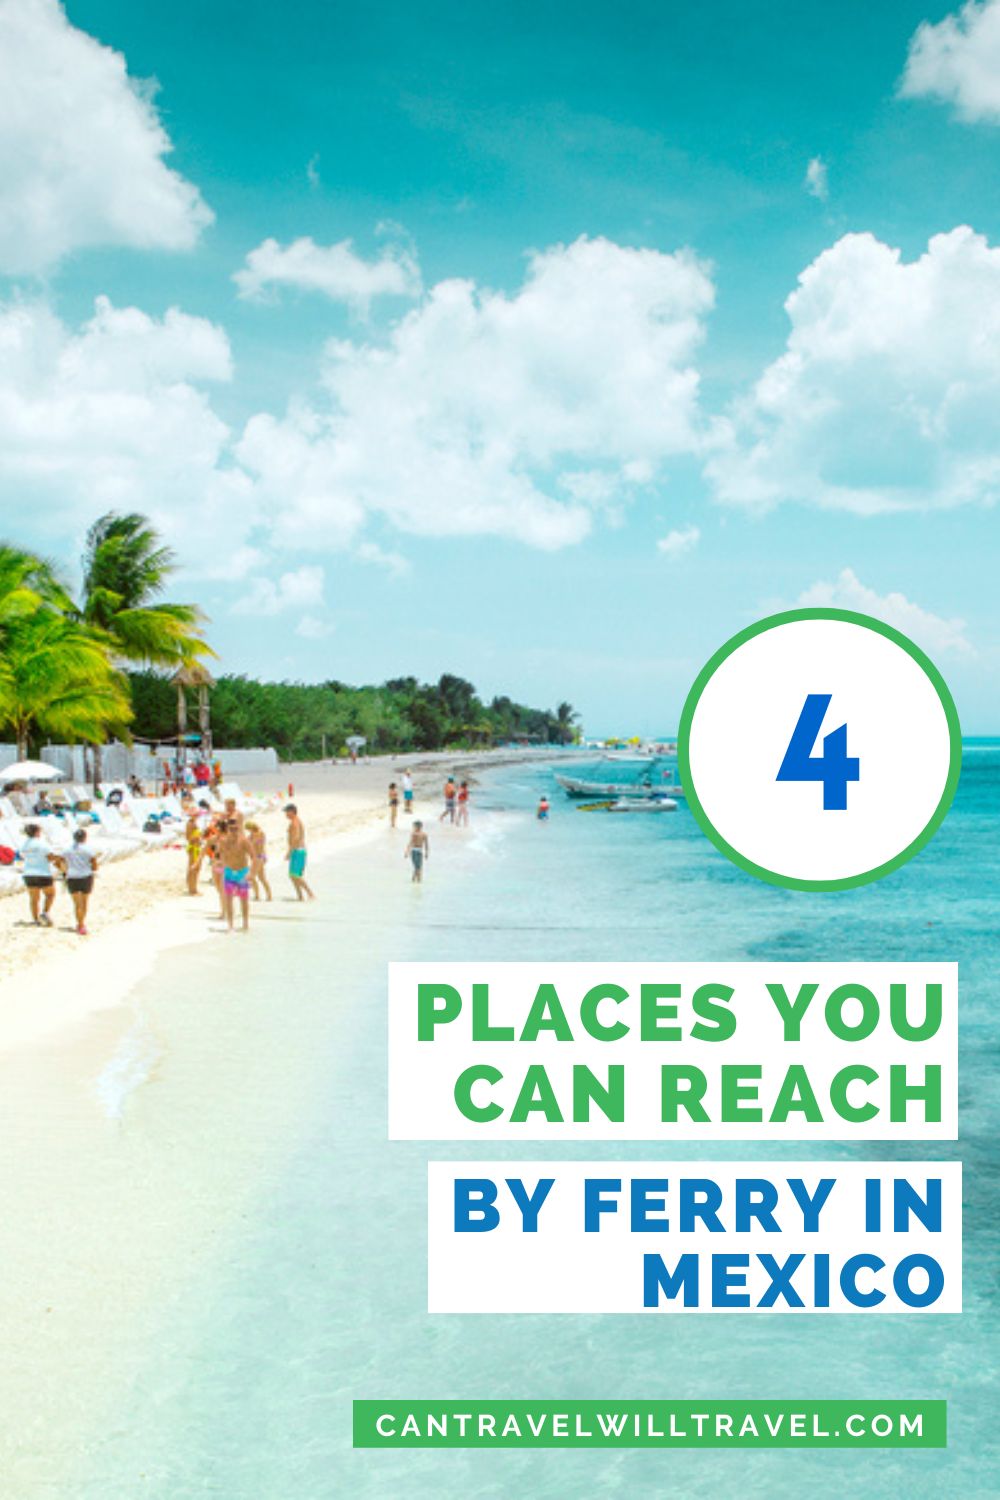 4 Places You Can Reach by Ferry in Mexico